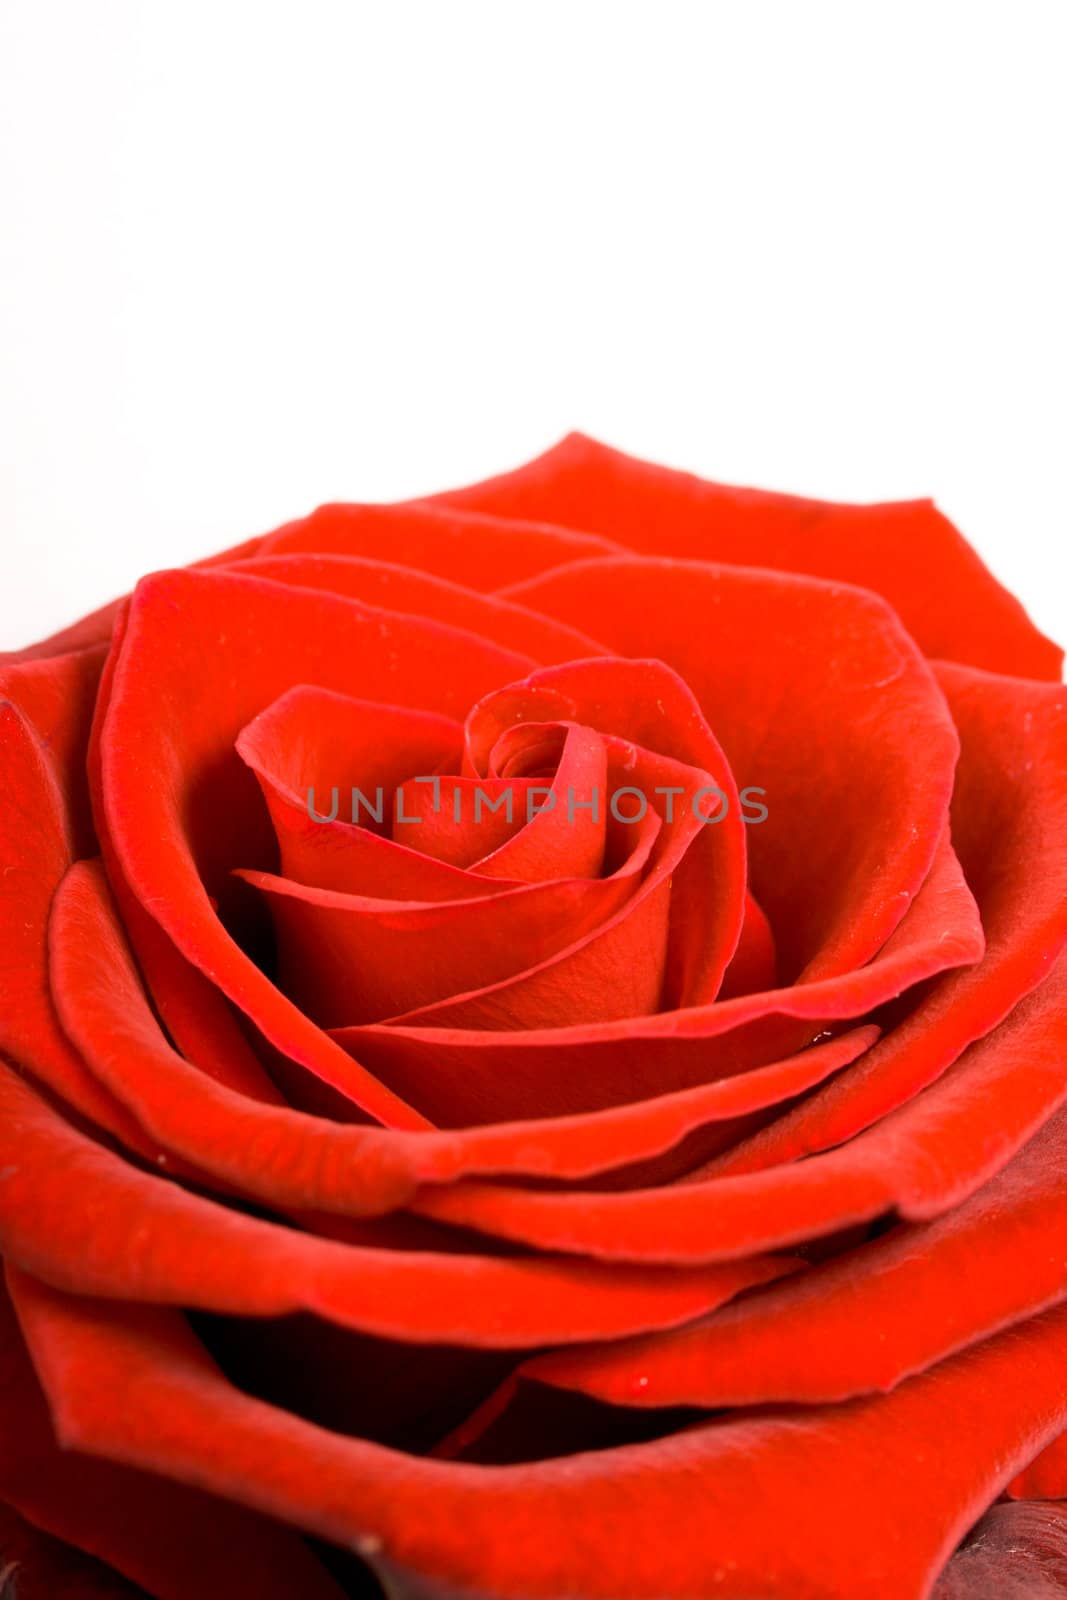 Red rose close up on white background